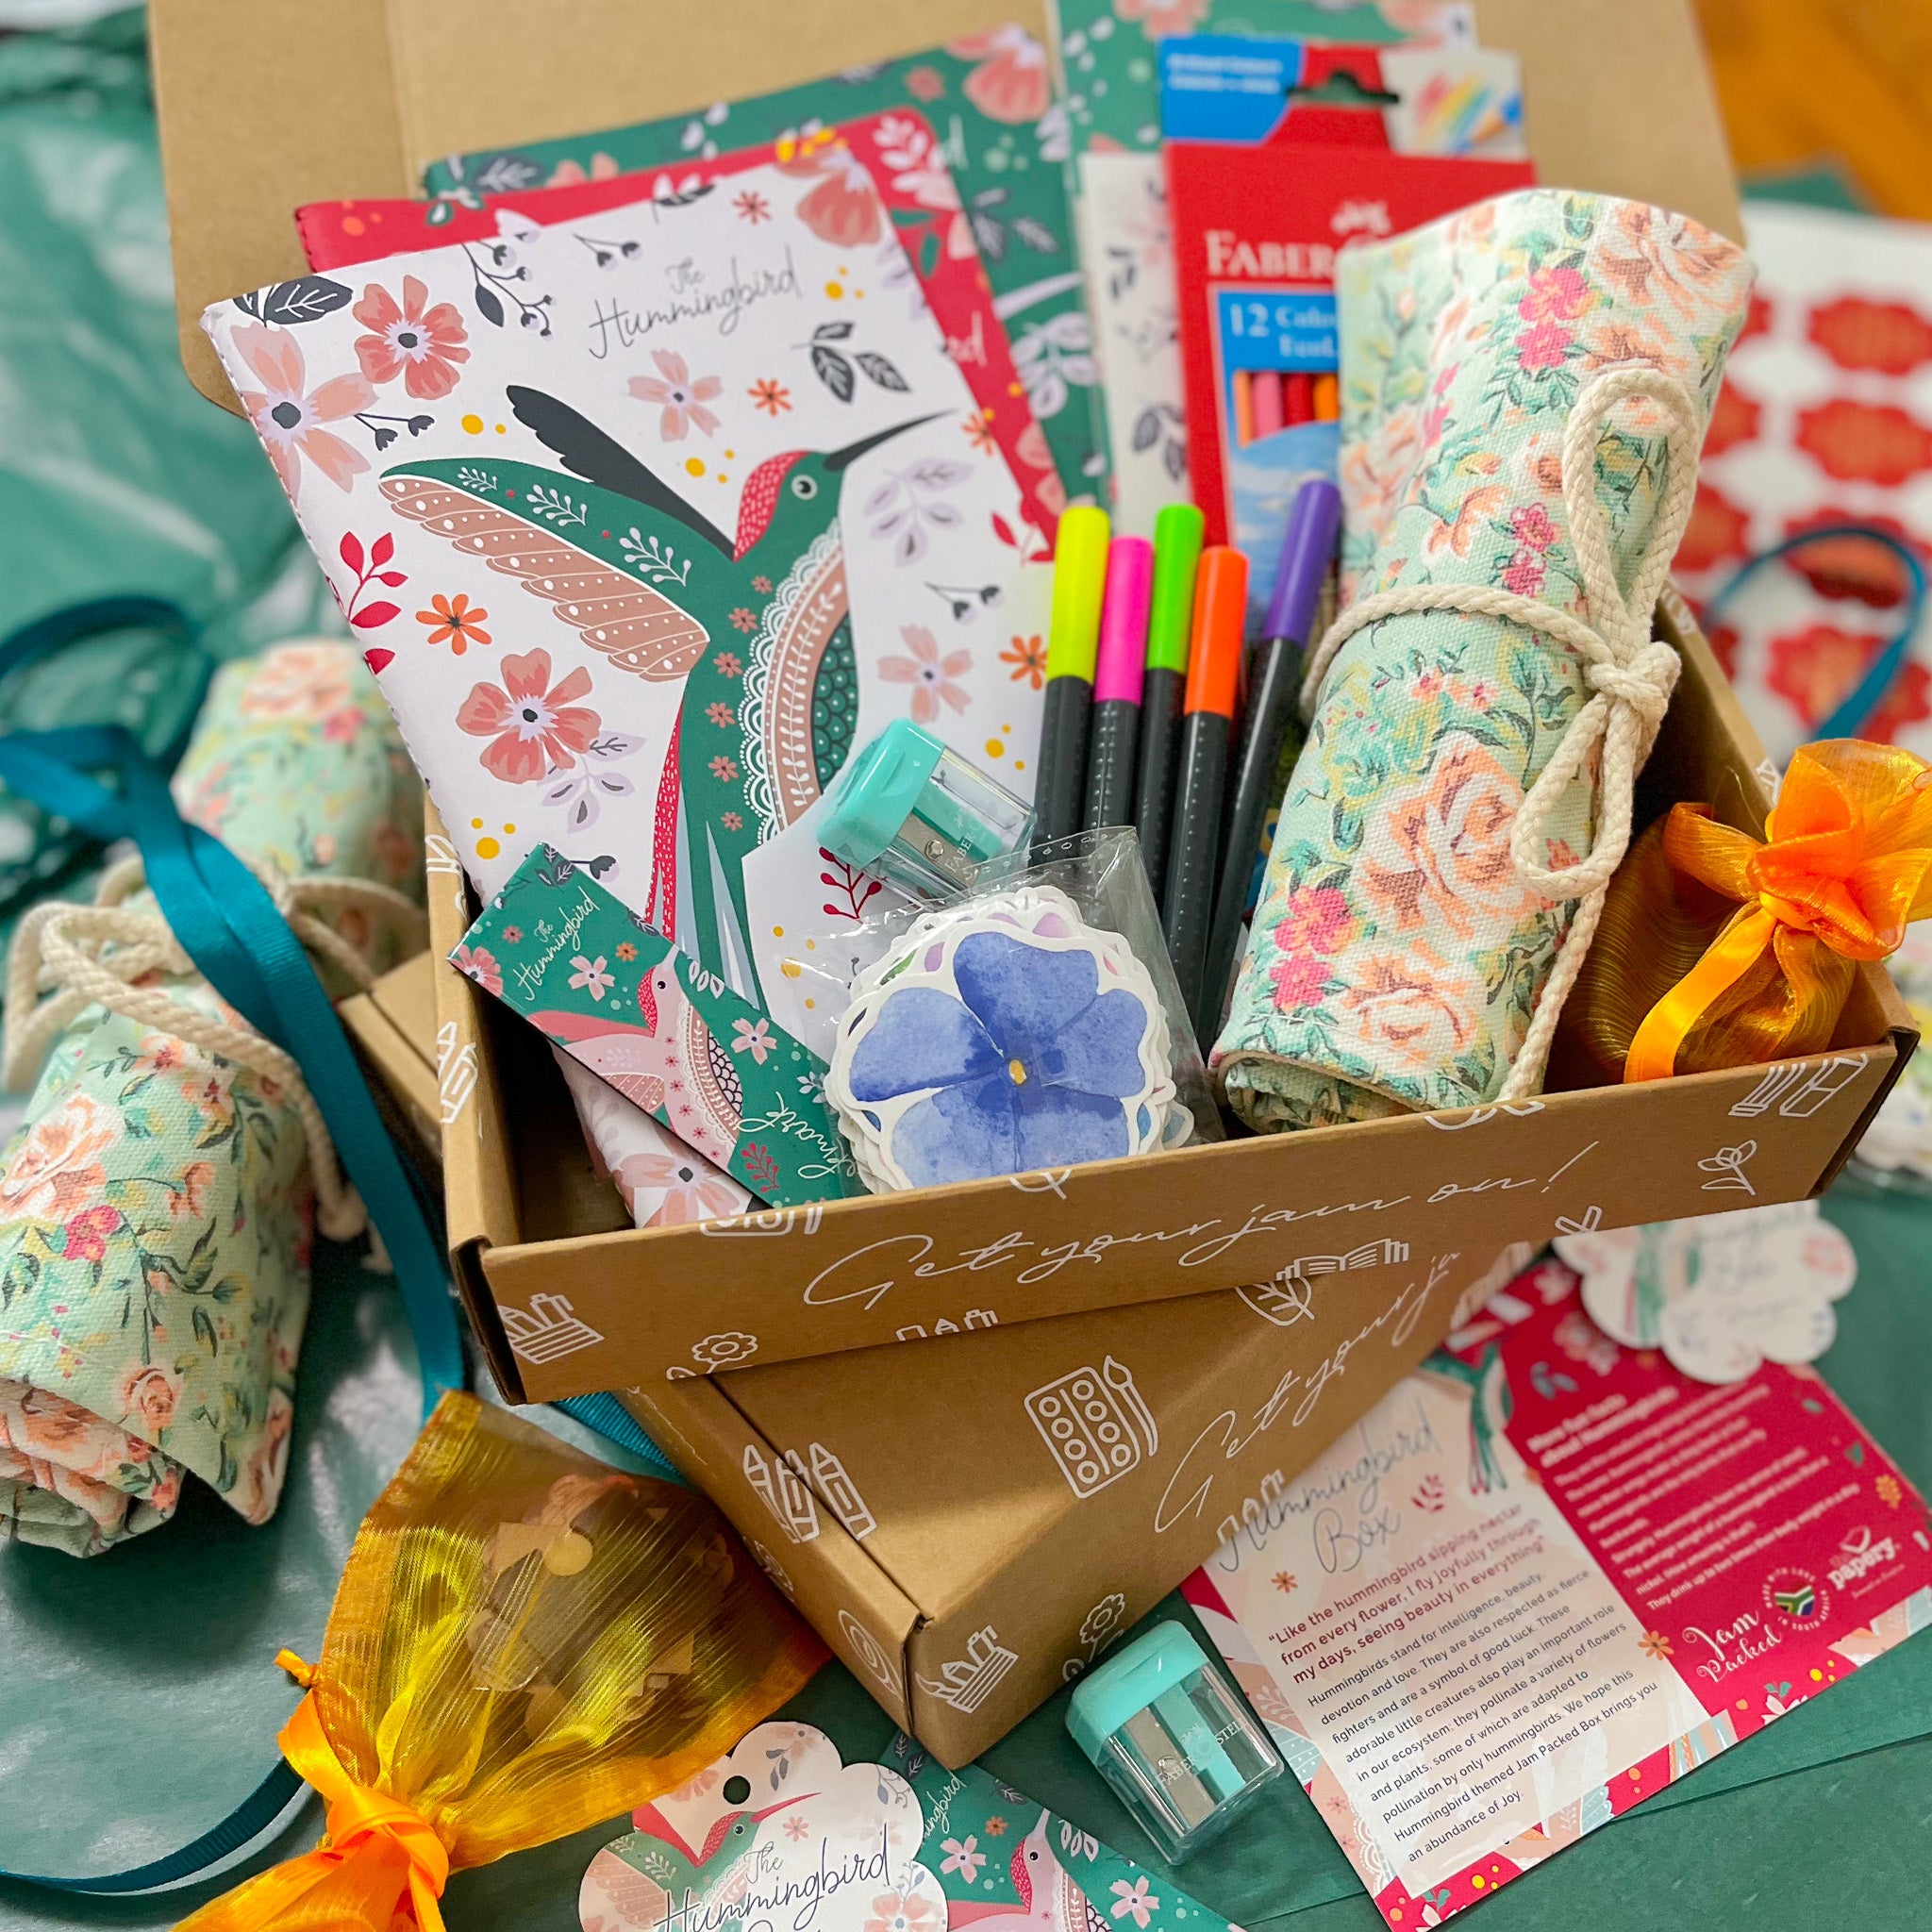 Image shows a hummingbird themed stationery box with it's contents